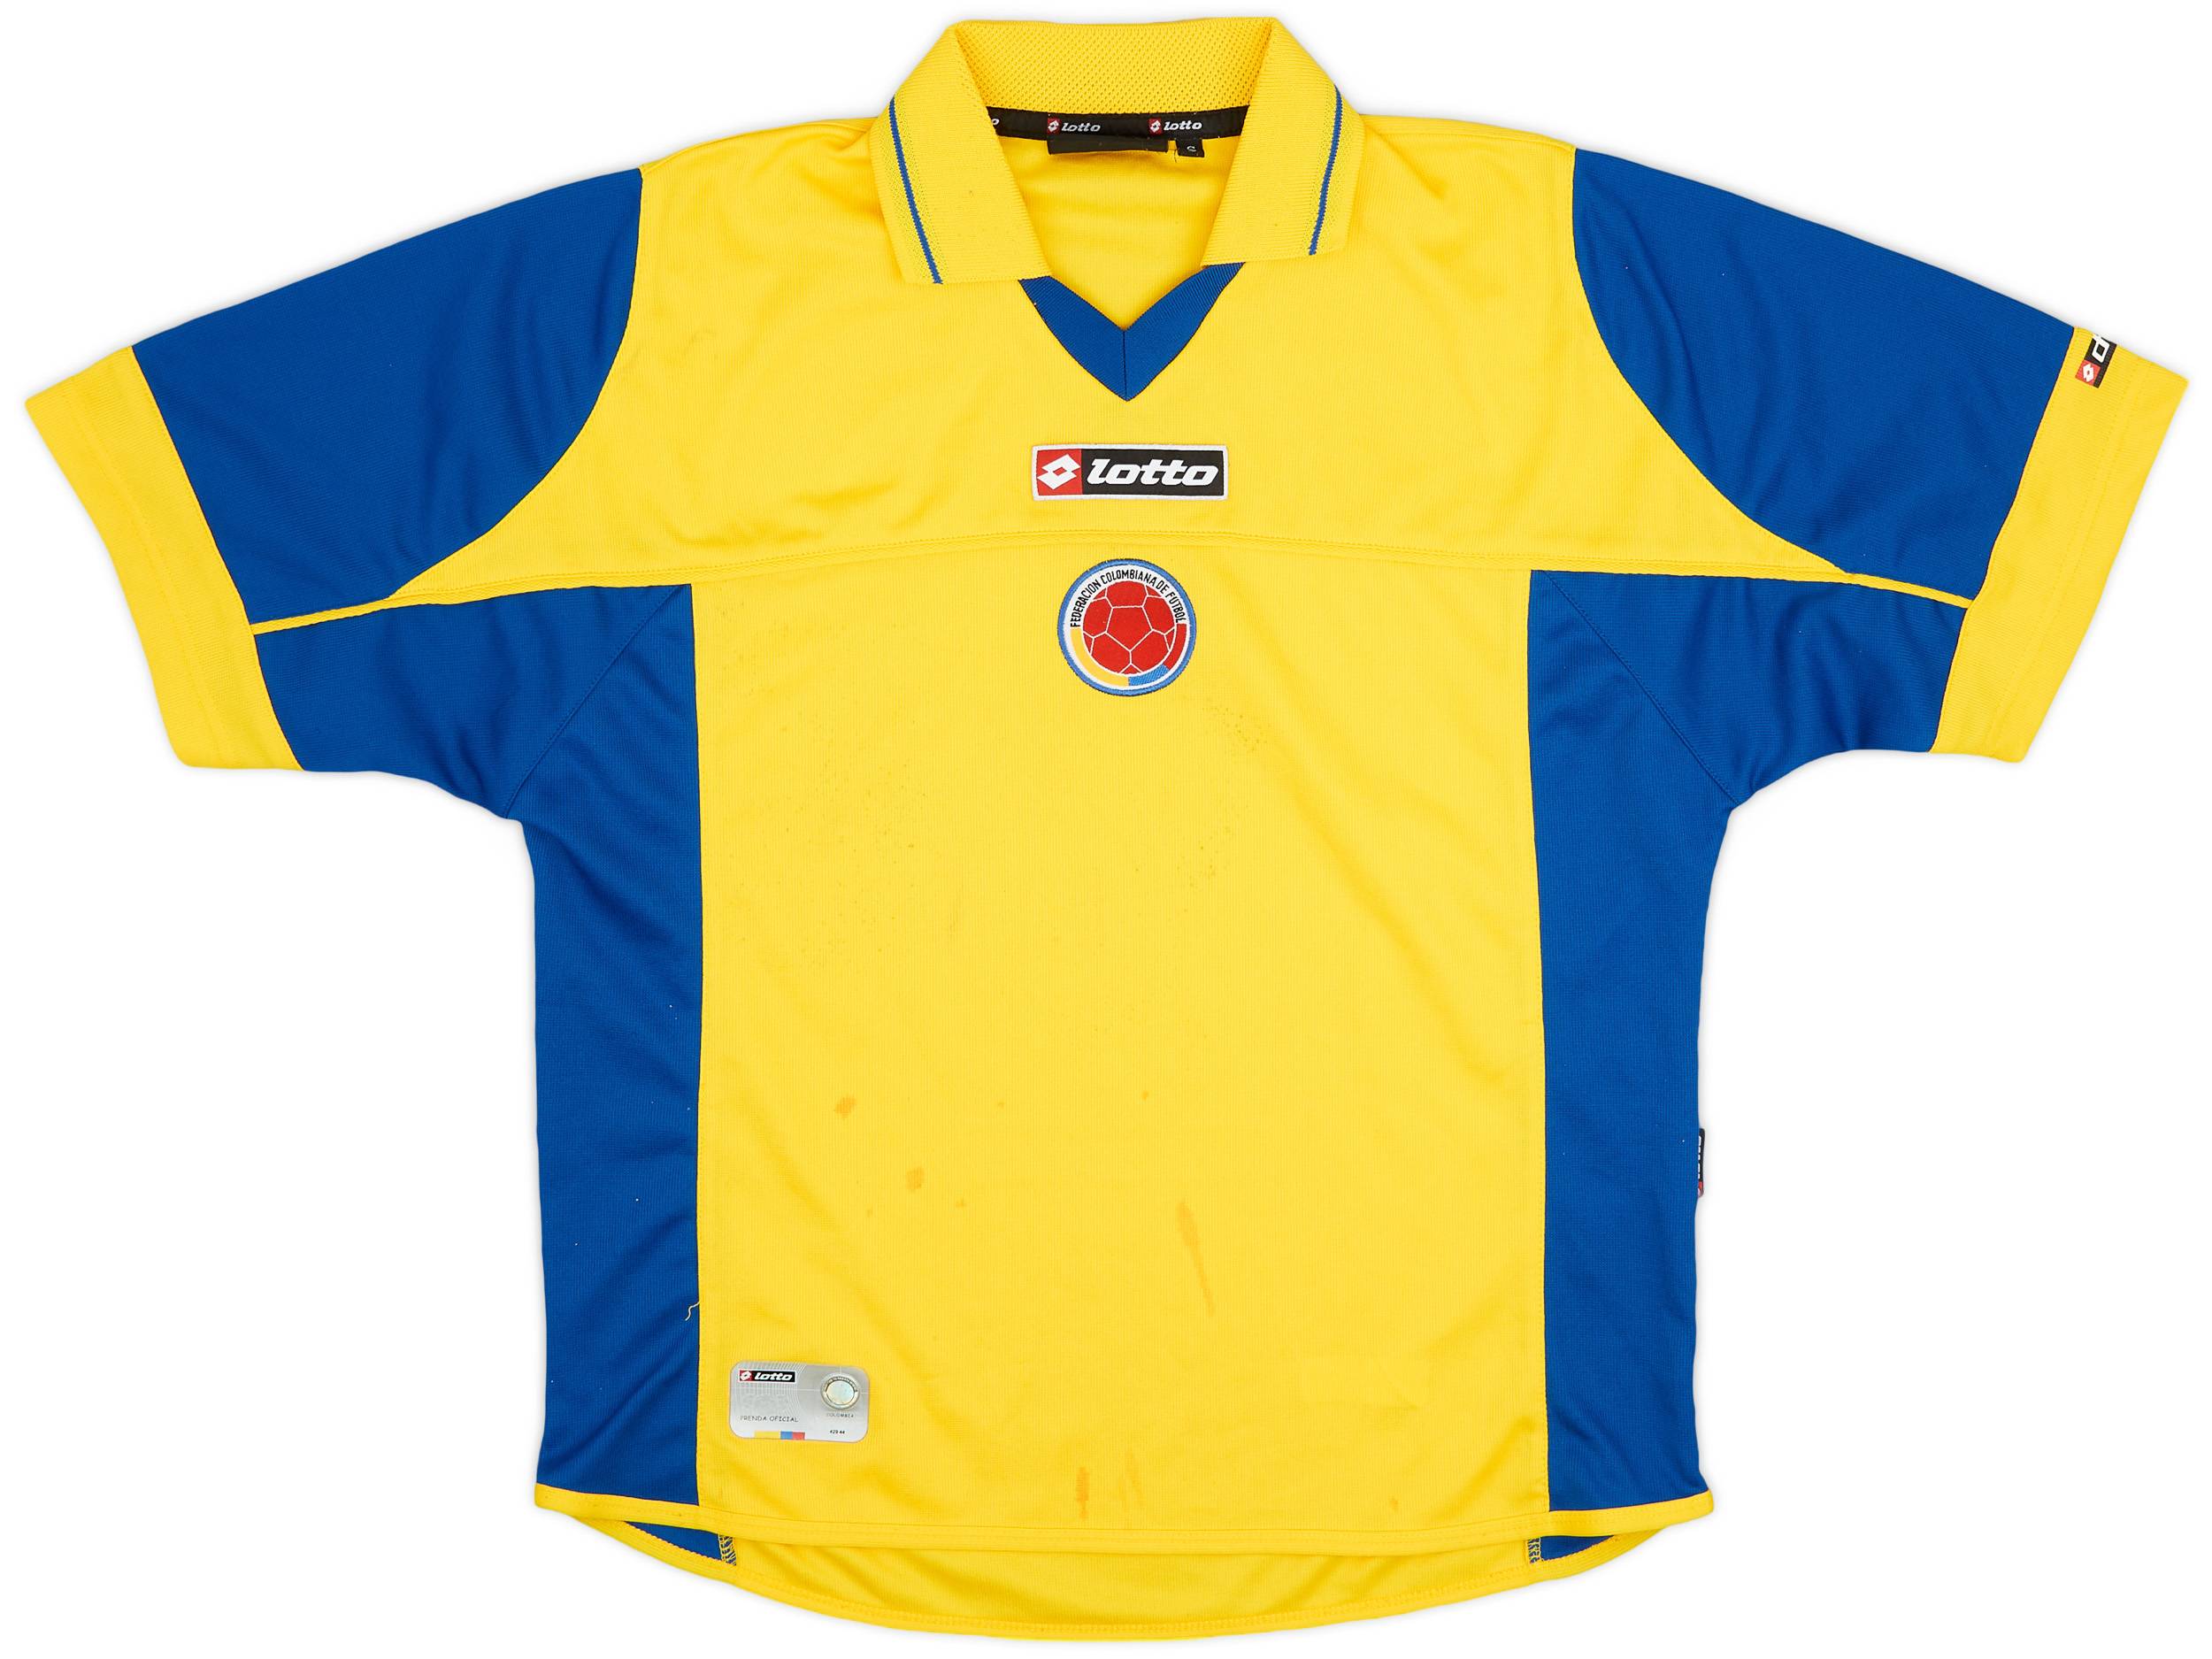 2003-04 Colombia Home Shirt - 5/10 - (S)